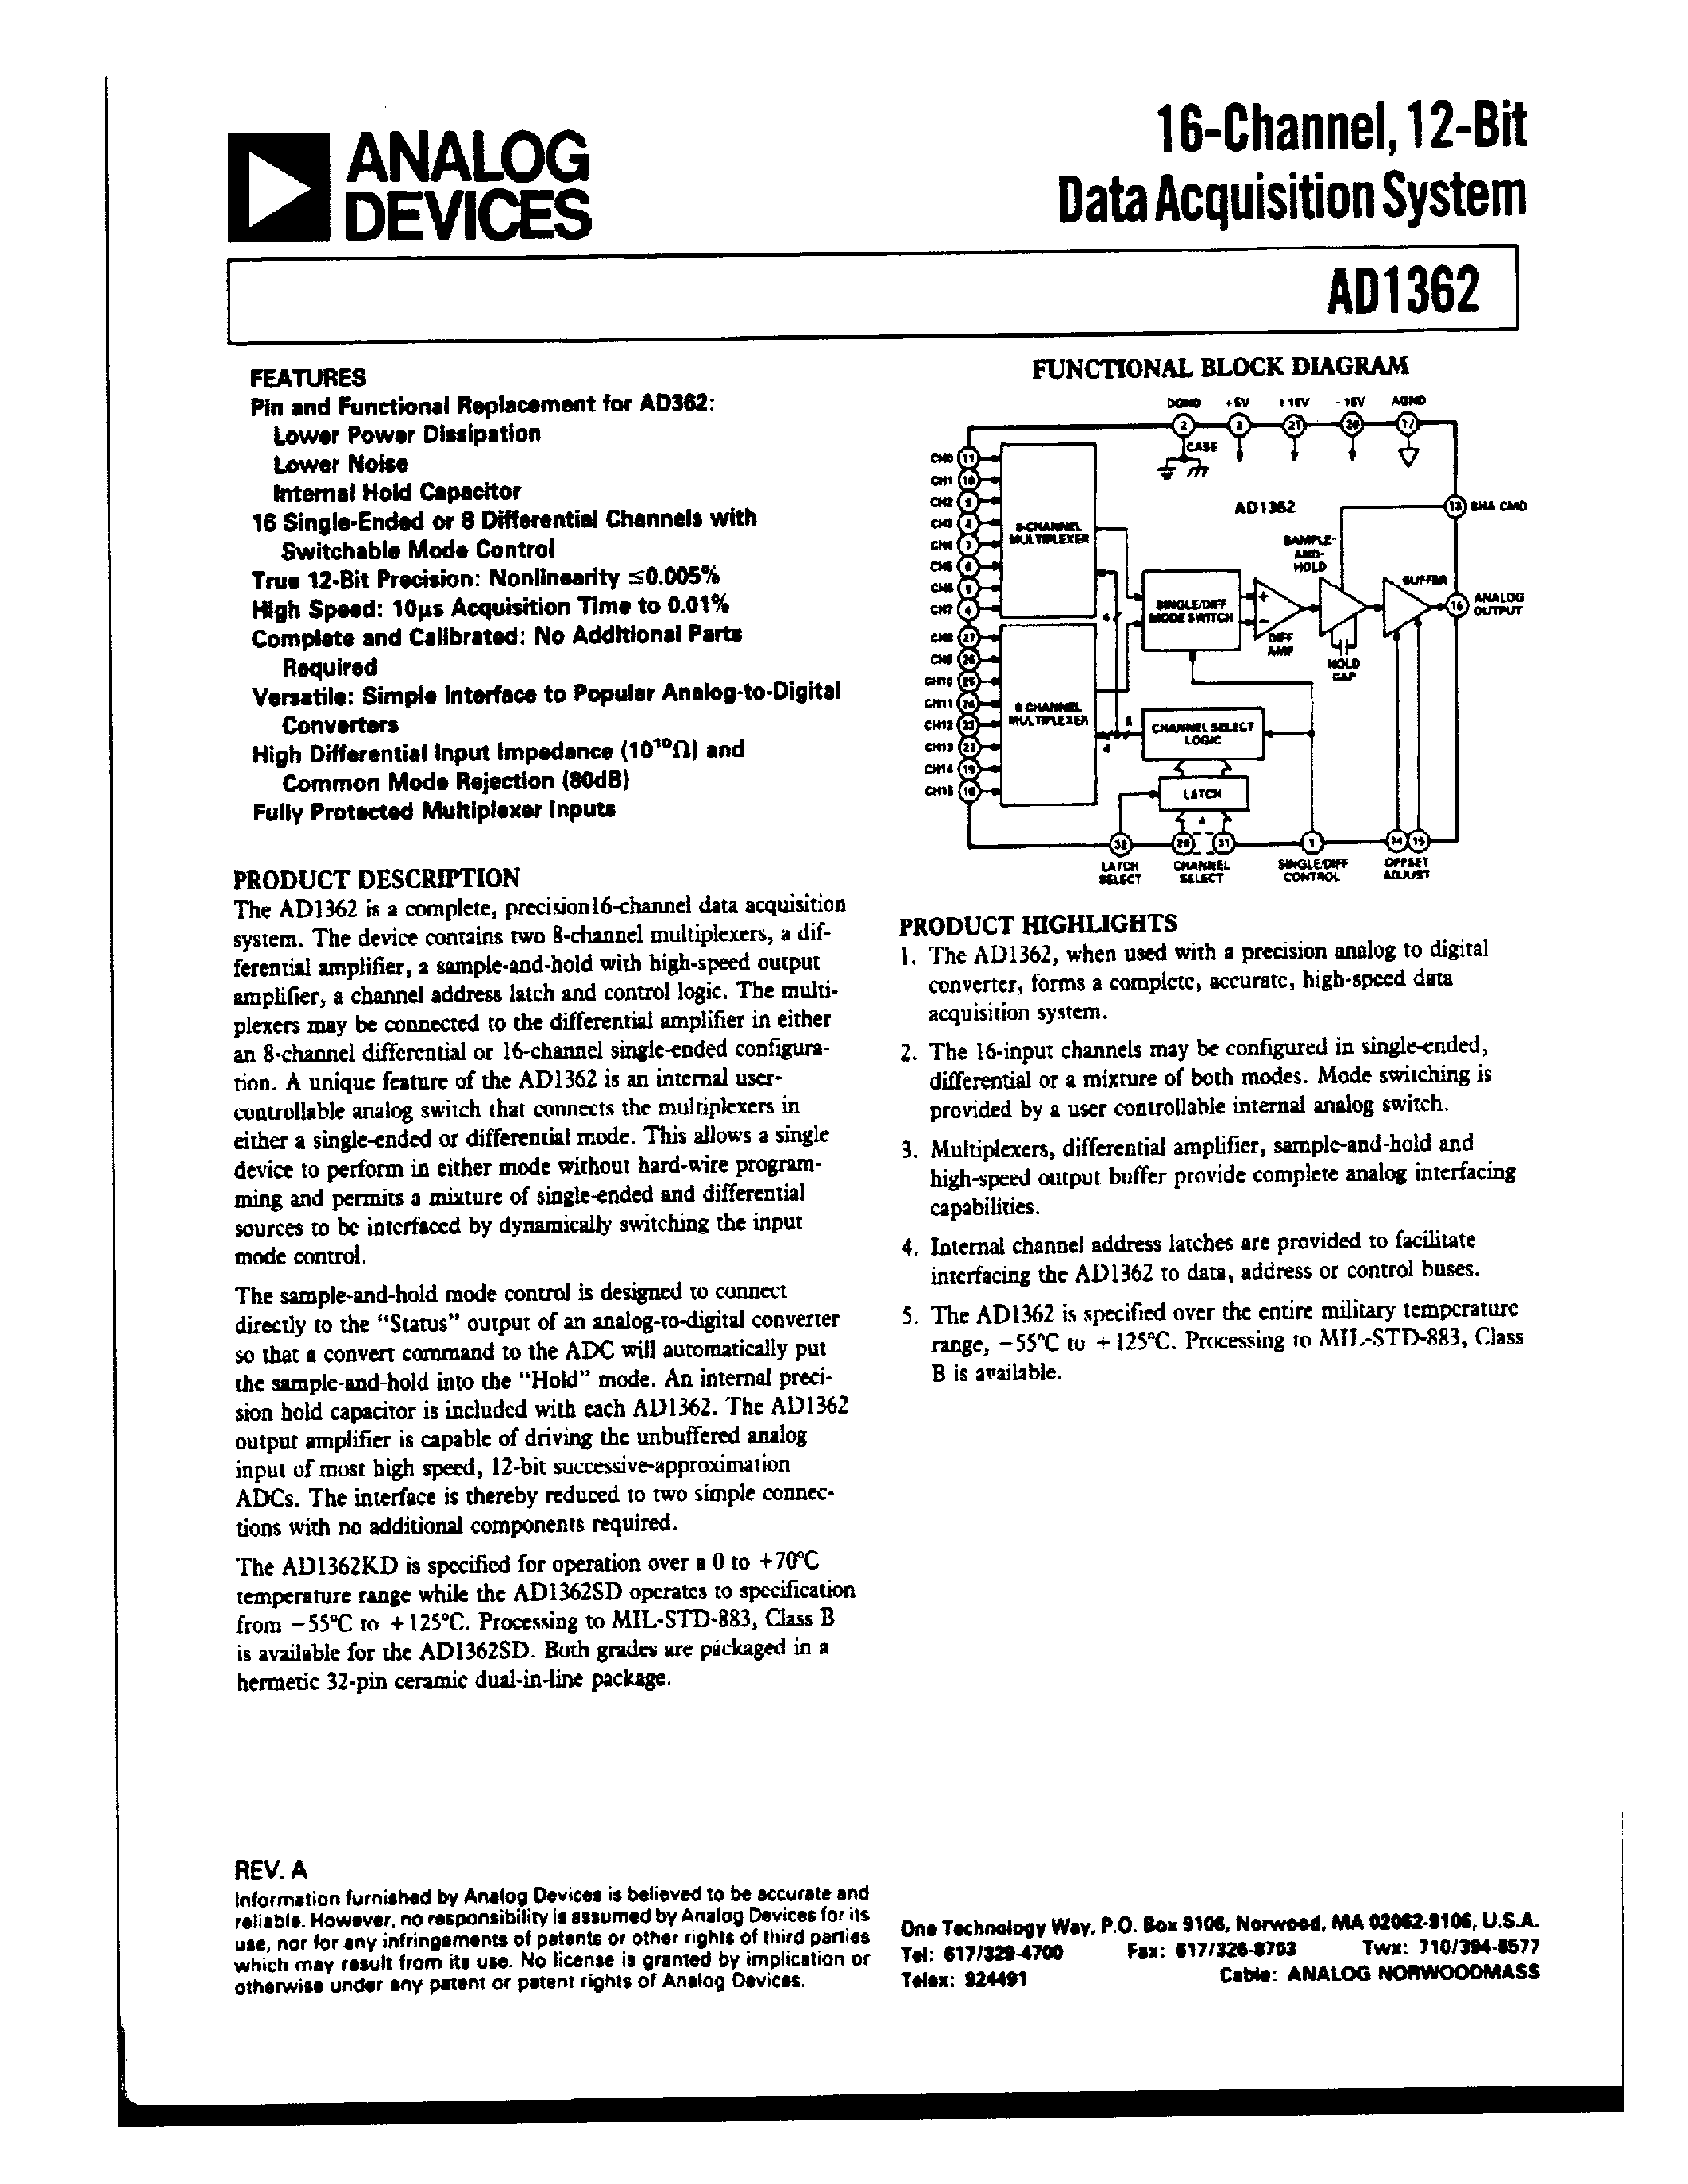 Datasheet AD1362SD - 16-Channel/12-Bit Data Acquisition System page 1